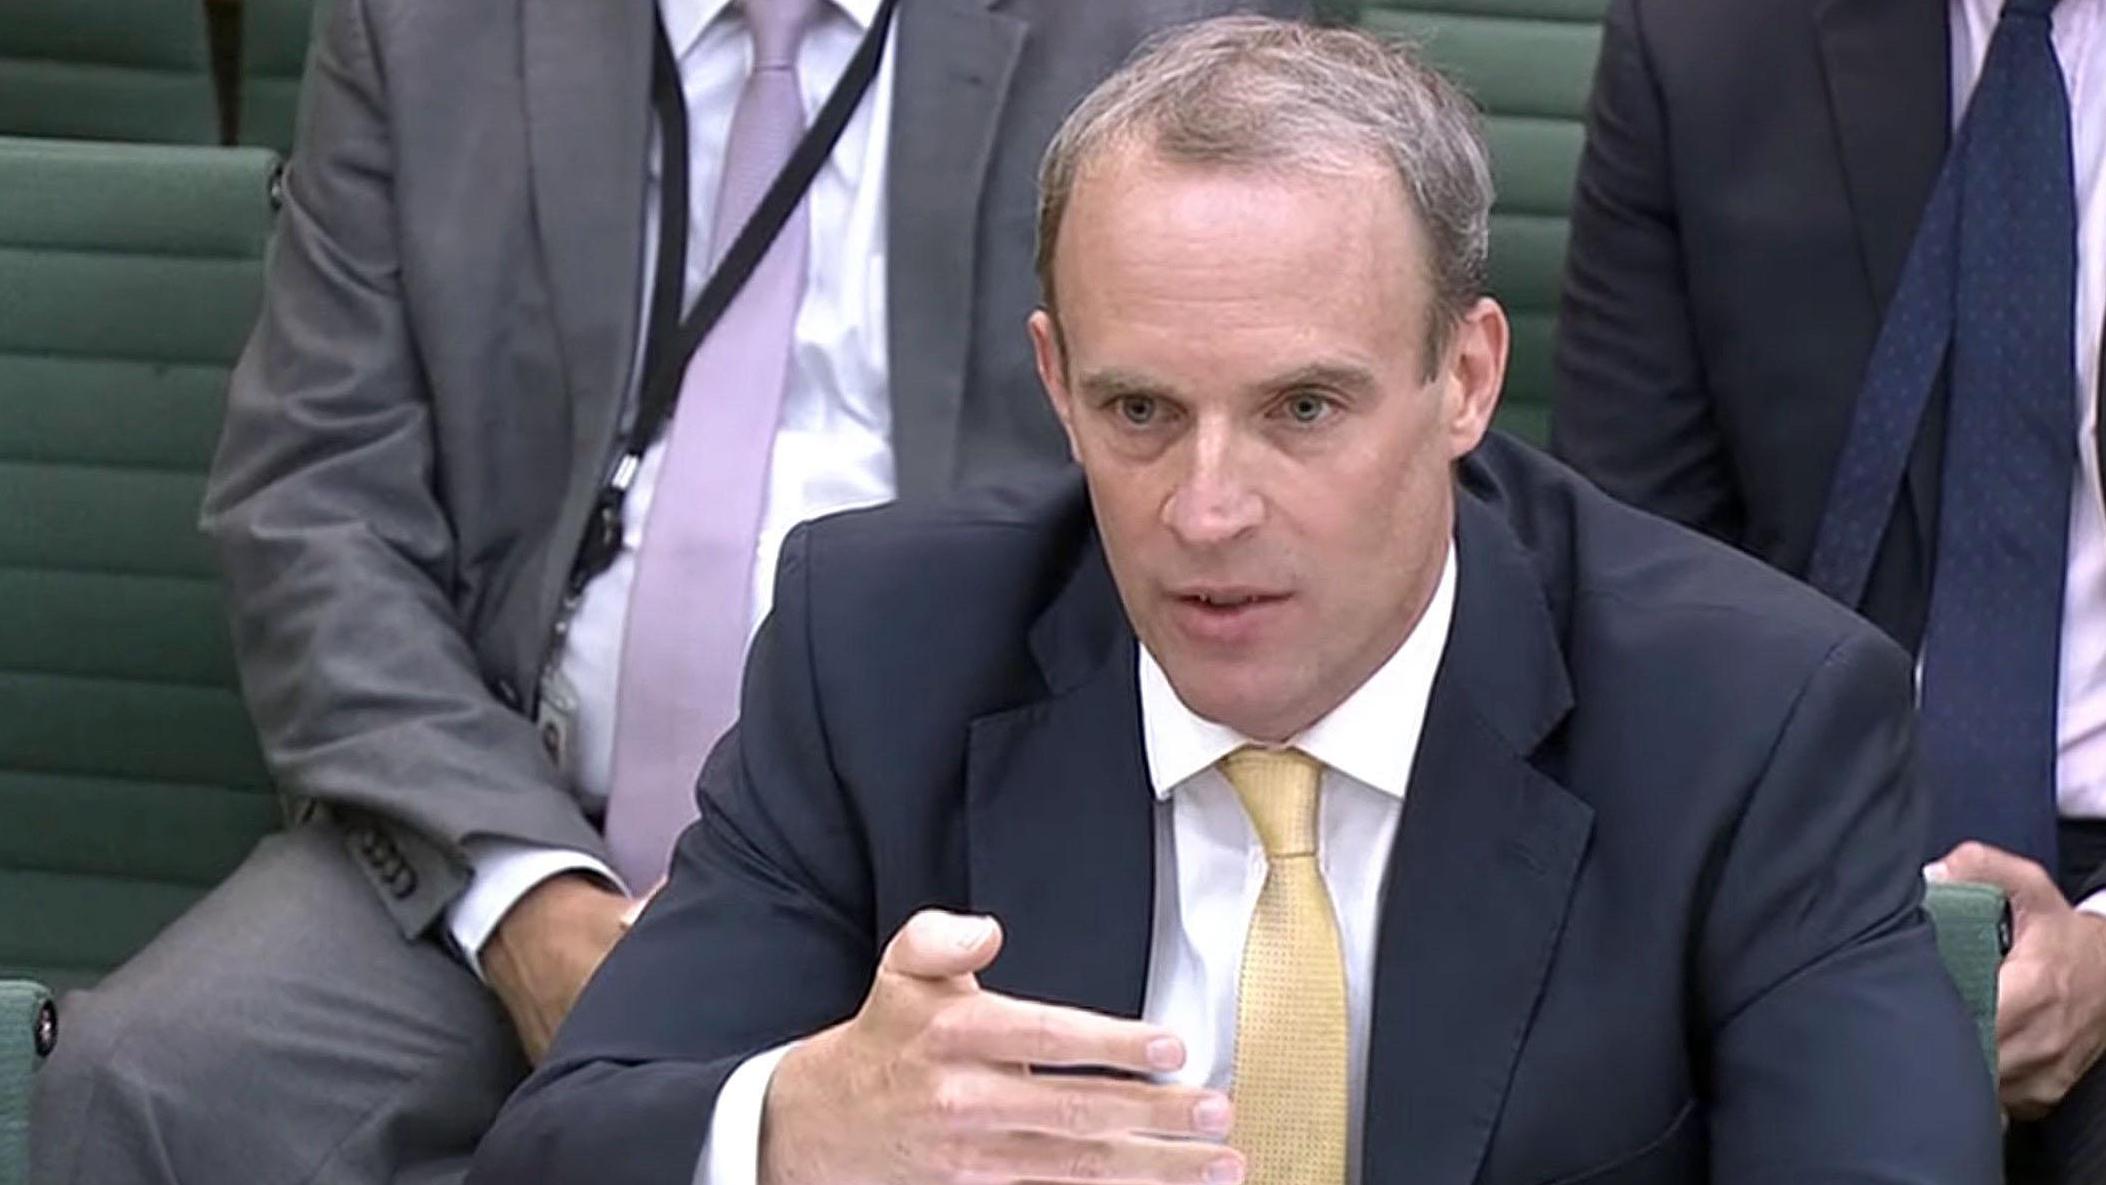 Raab was warned of threat two weeks before he went on holiday